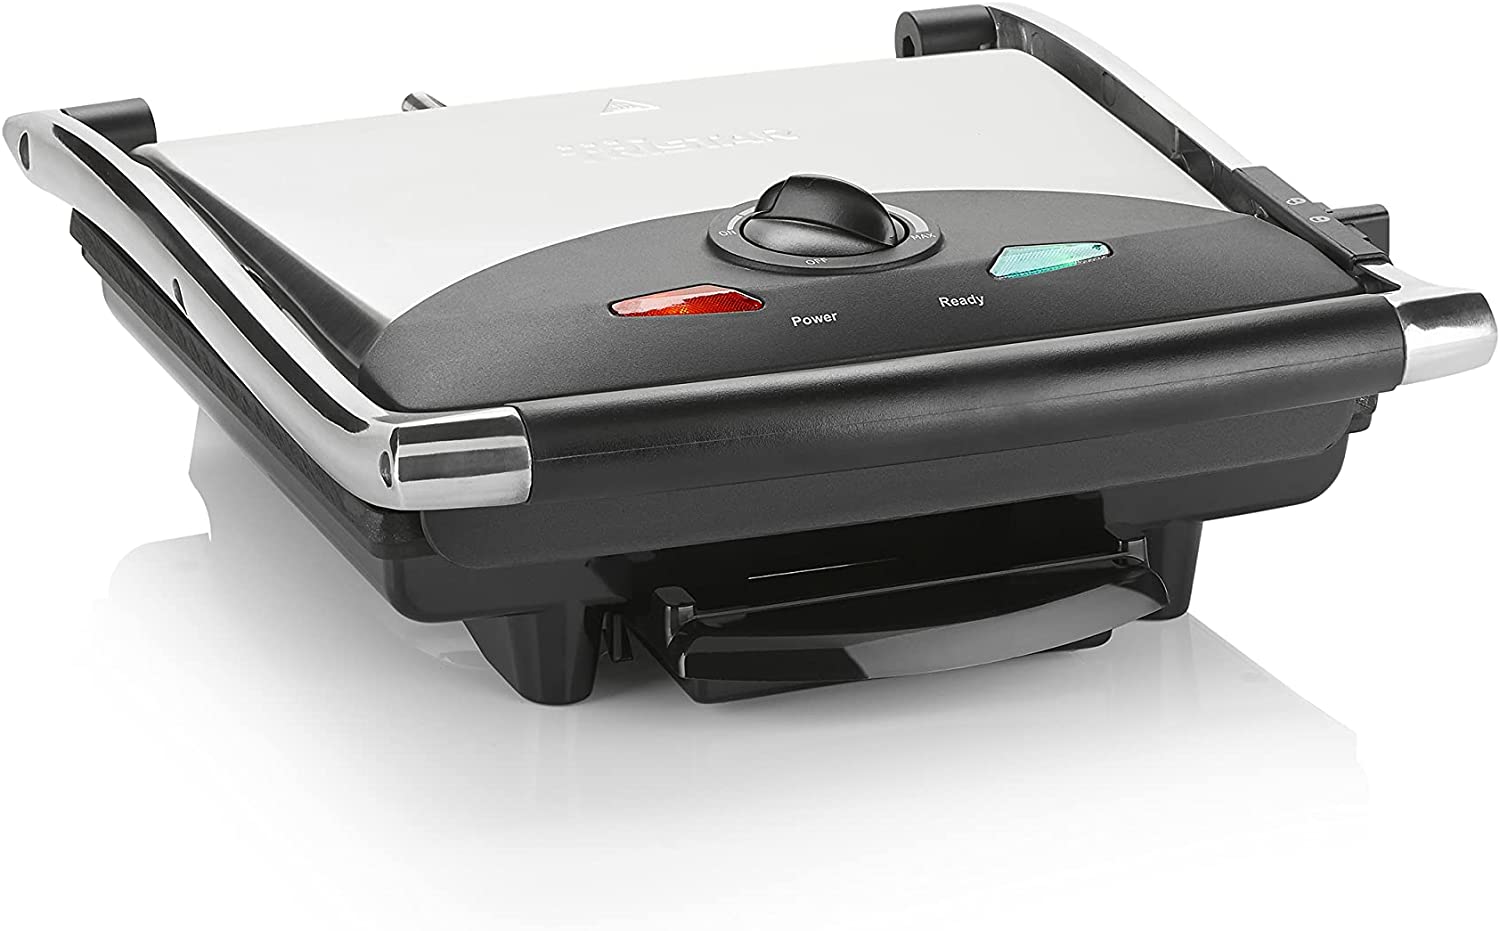 Tristar Contact Grill GR-2846, Sandwich Maker with Stainless Steel Design, 700 Watts, 0.7 m Cable Length, Non-Stick Coating, Insulated Handles